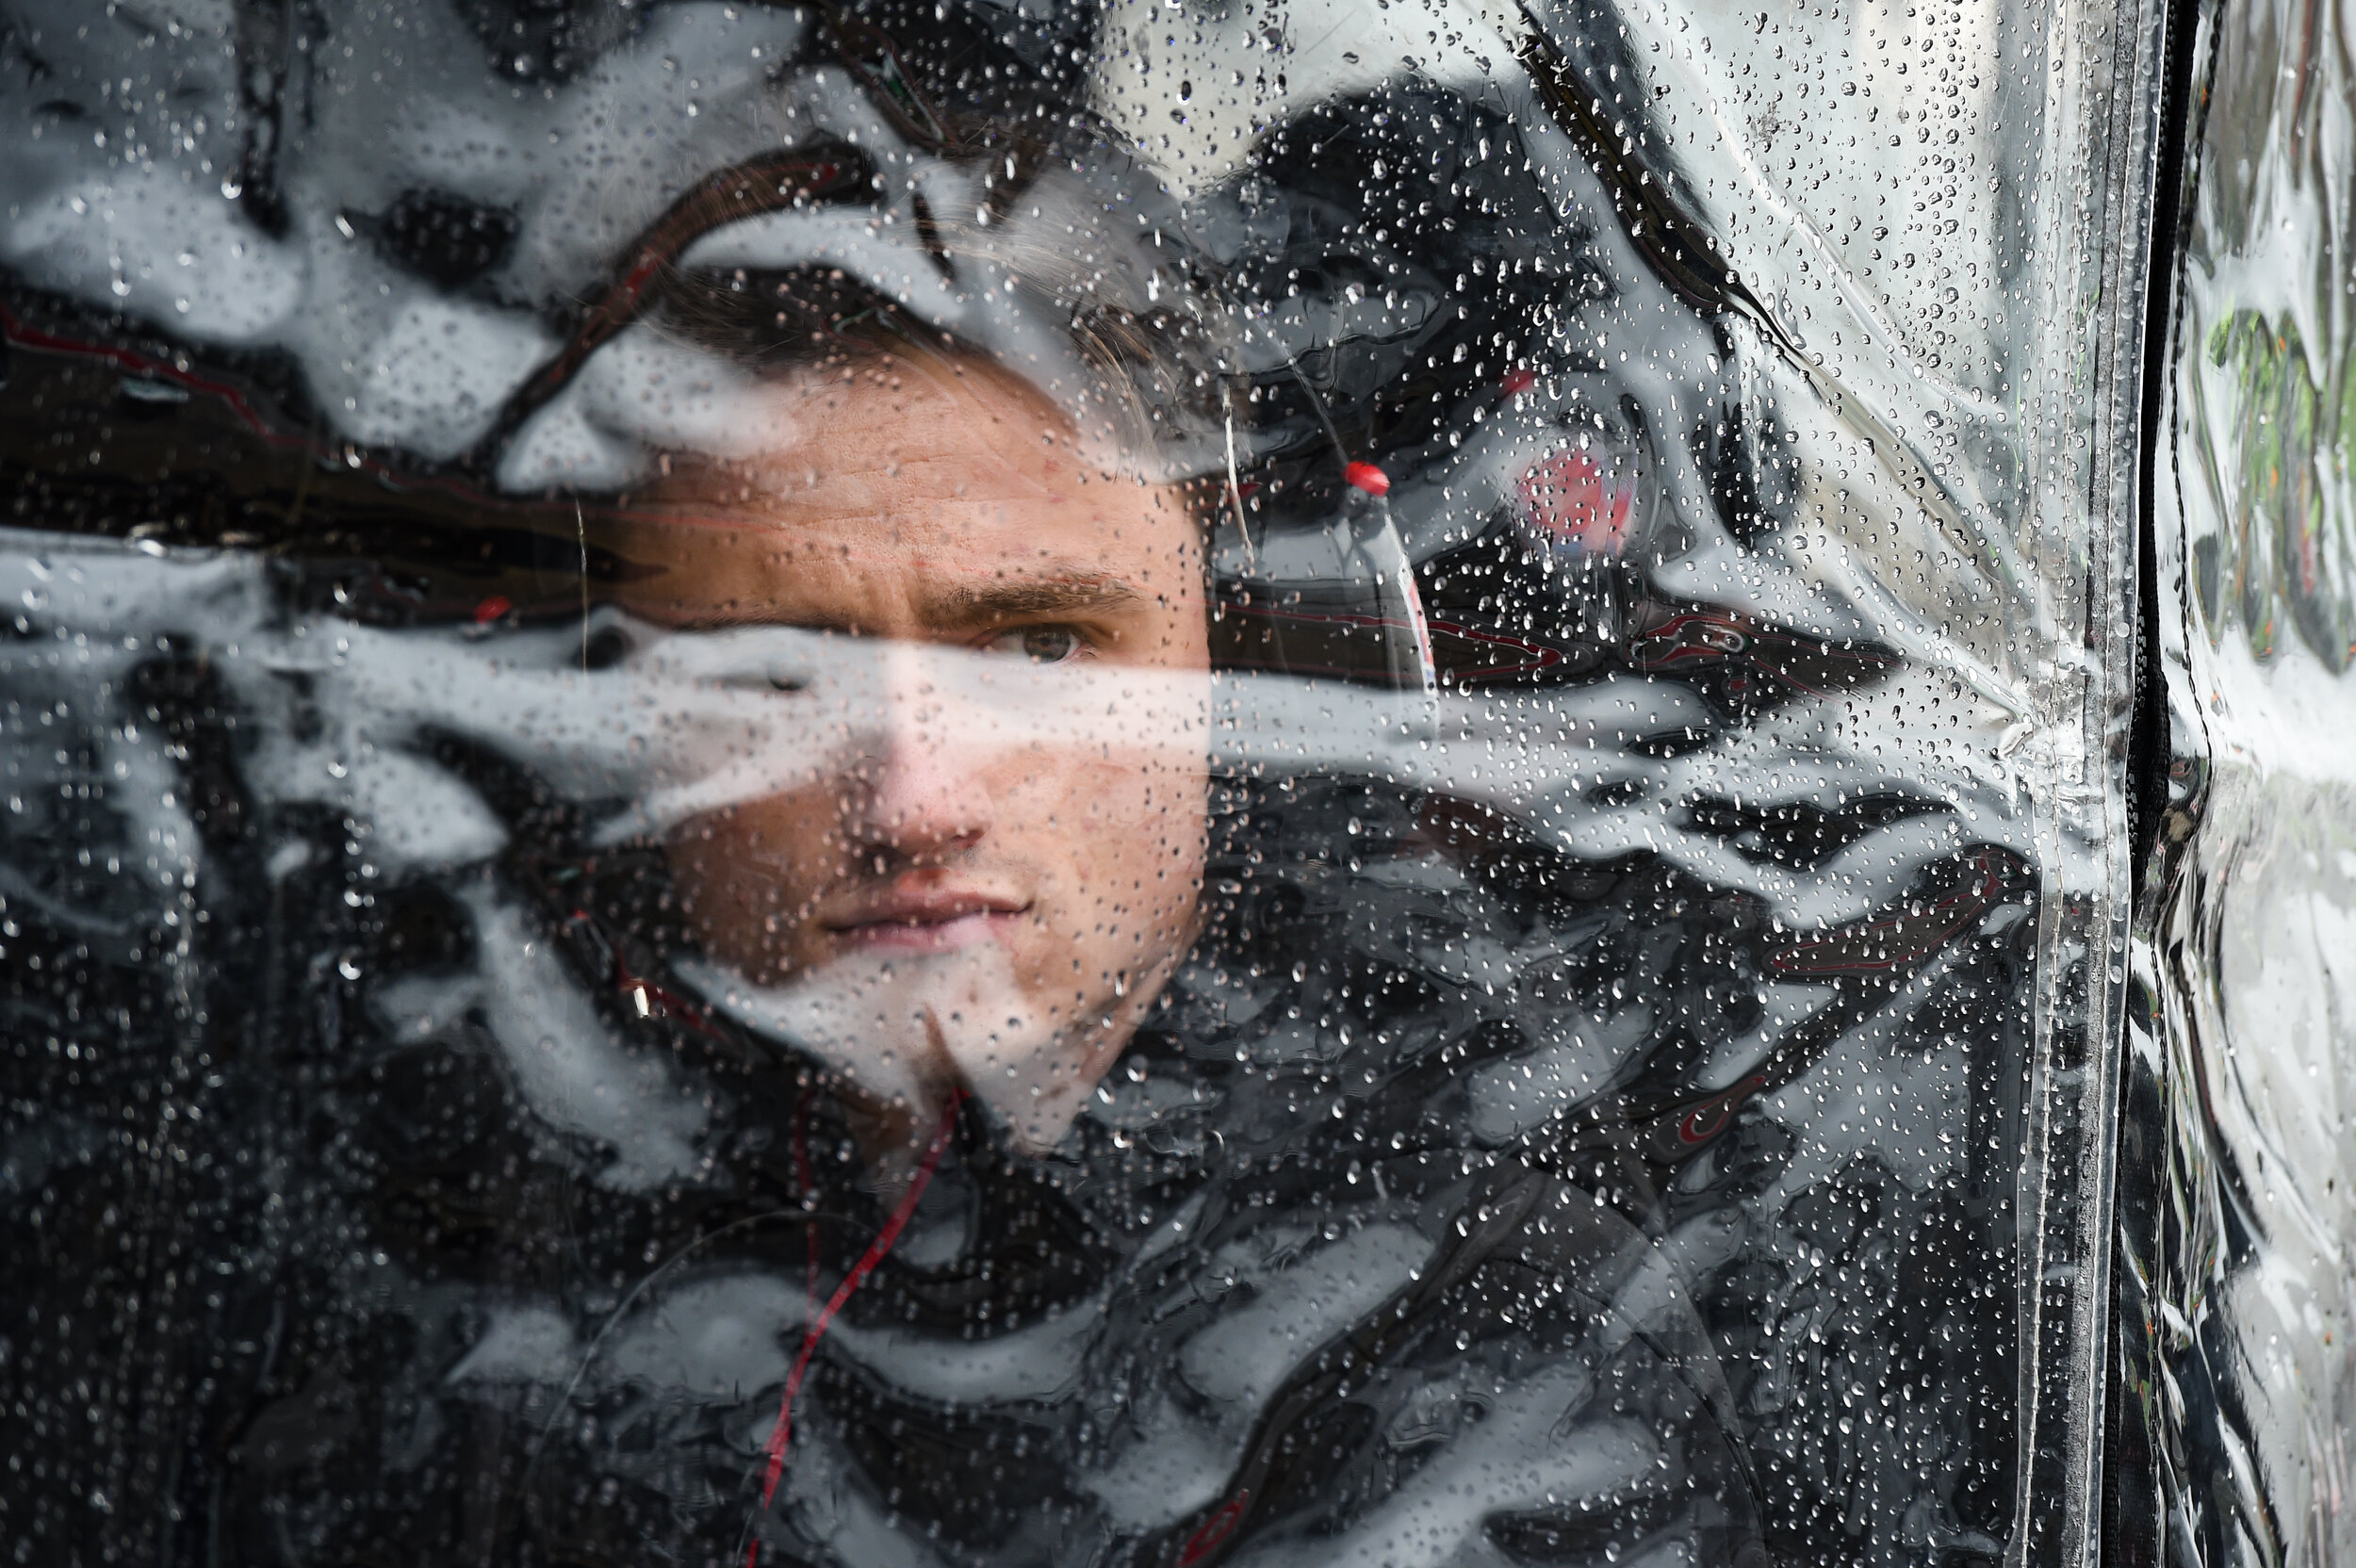  George Michael Steinbrenner watches the Andretti Autosport work during a wet spring training at COTA. The beads of rain and plastic make for a unique view for a photograph. One of my favorite portraits of the year! 